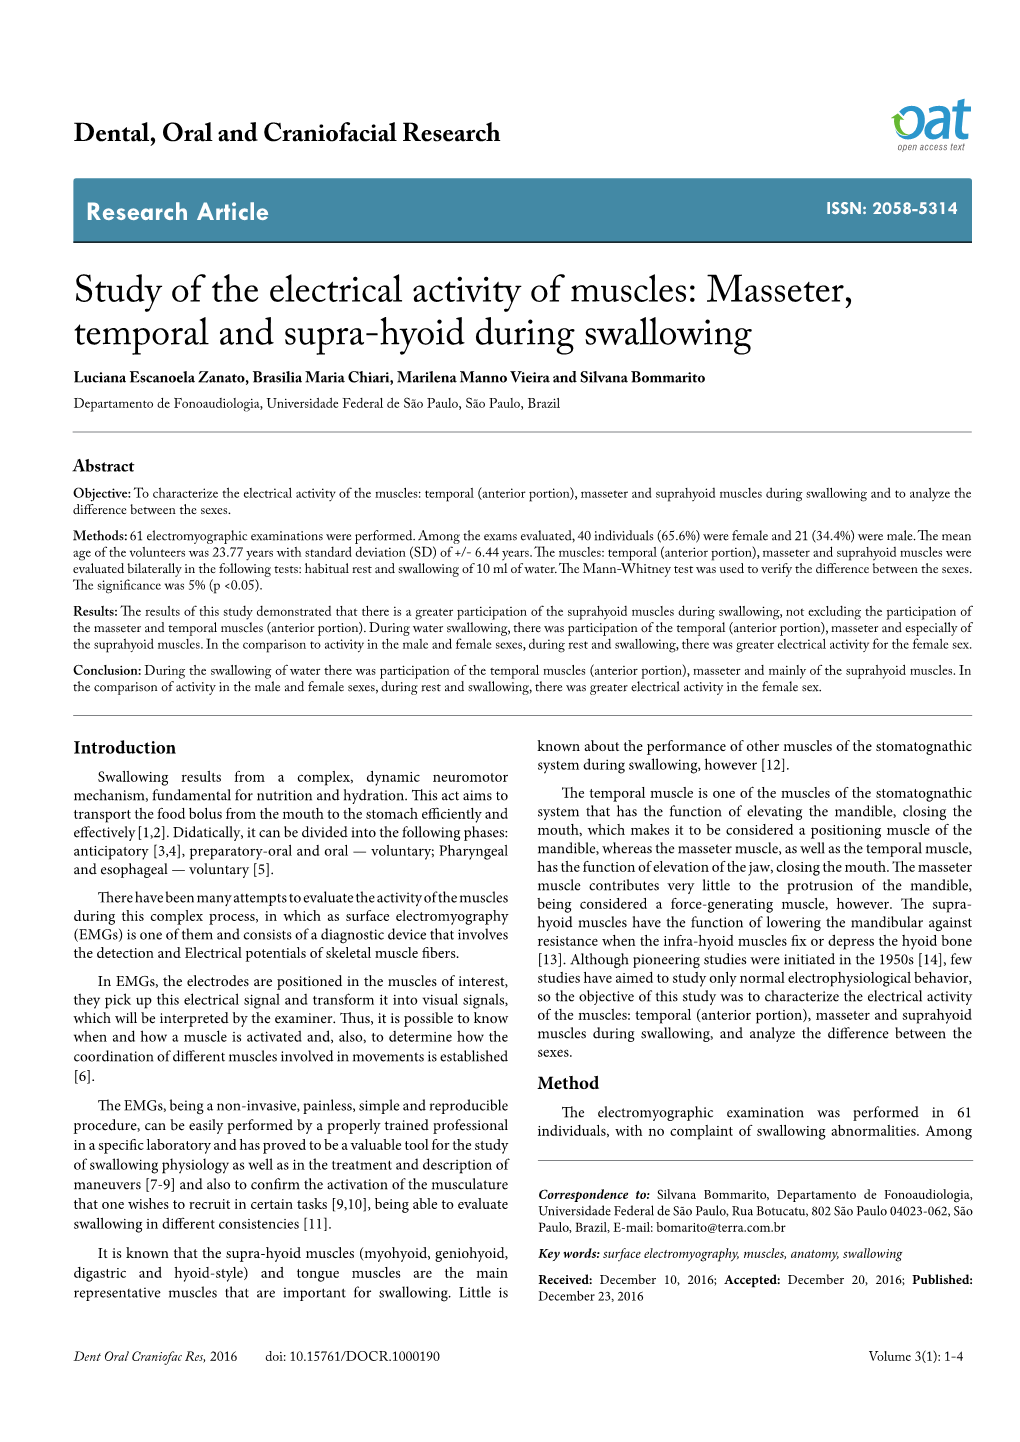 Study of the Electrical Activity of Muscles: Masseter, Temporal and Supra-Hyoid During Swallowing